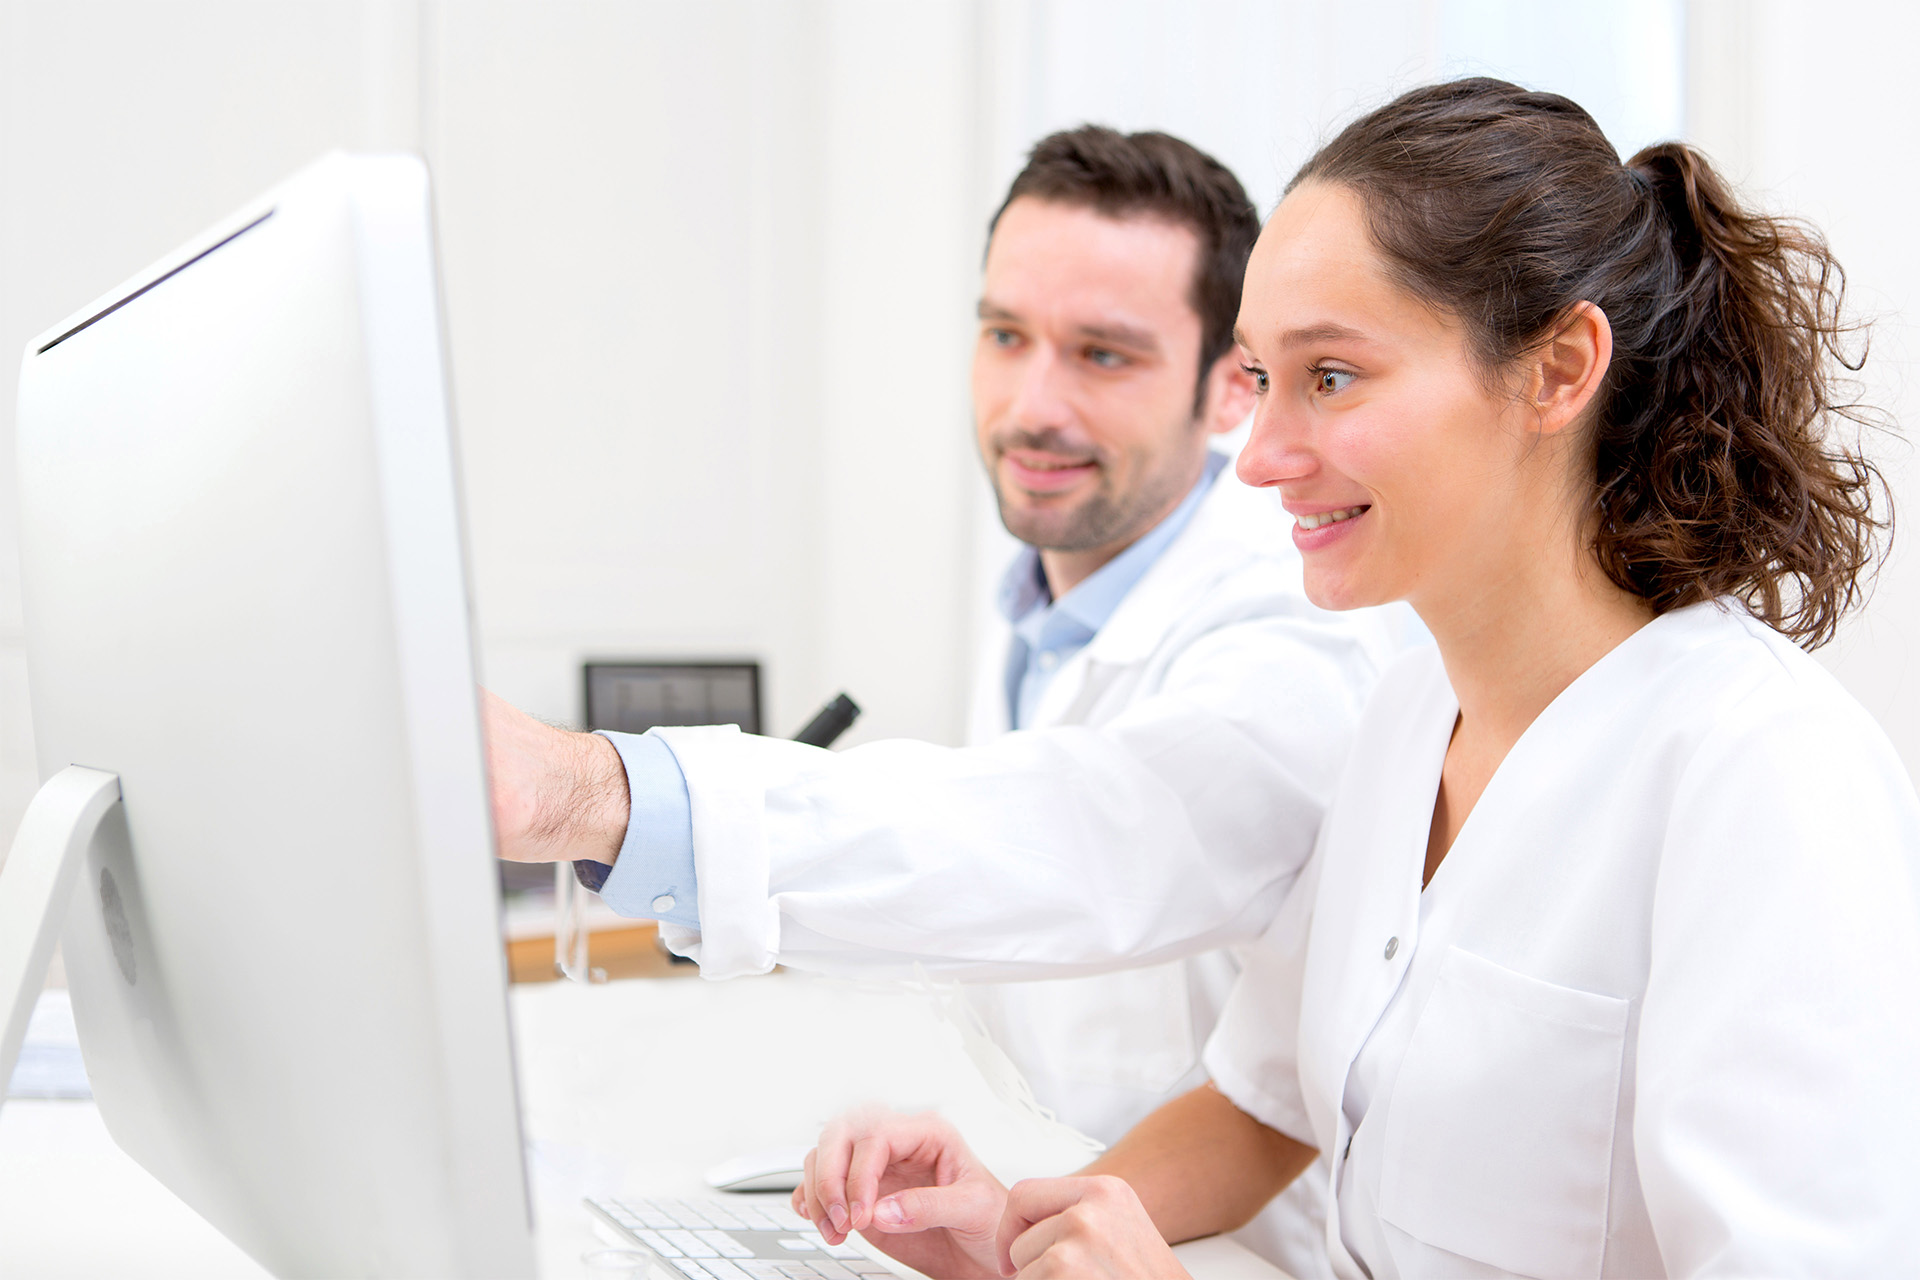 Two pharmacy professionals focused on a computer monitor to learn virtually.